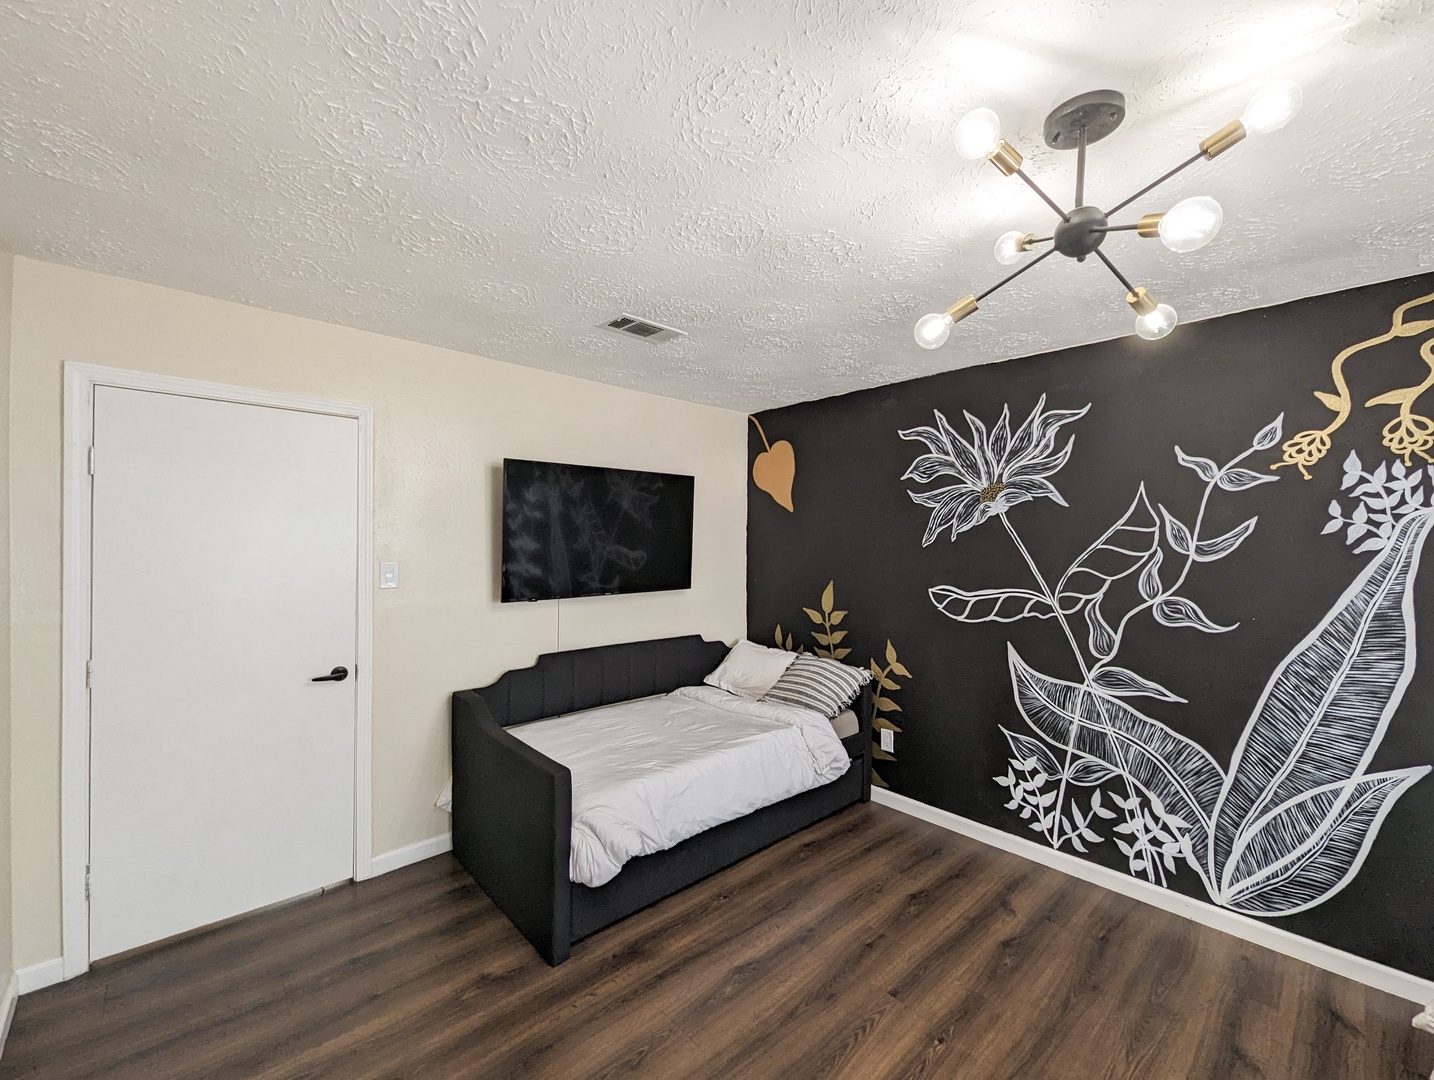 The master suite features a Smart TV, private ensuite, king bed, twin bed & trundle